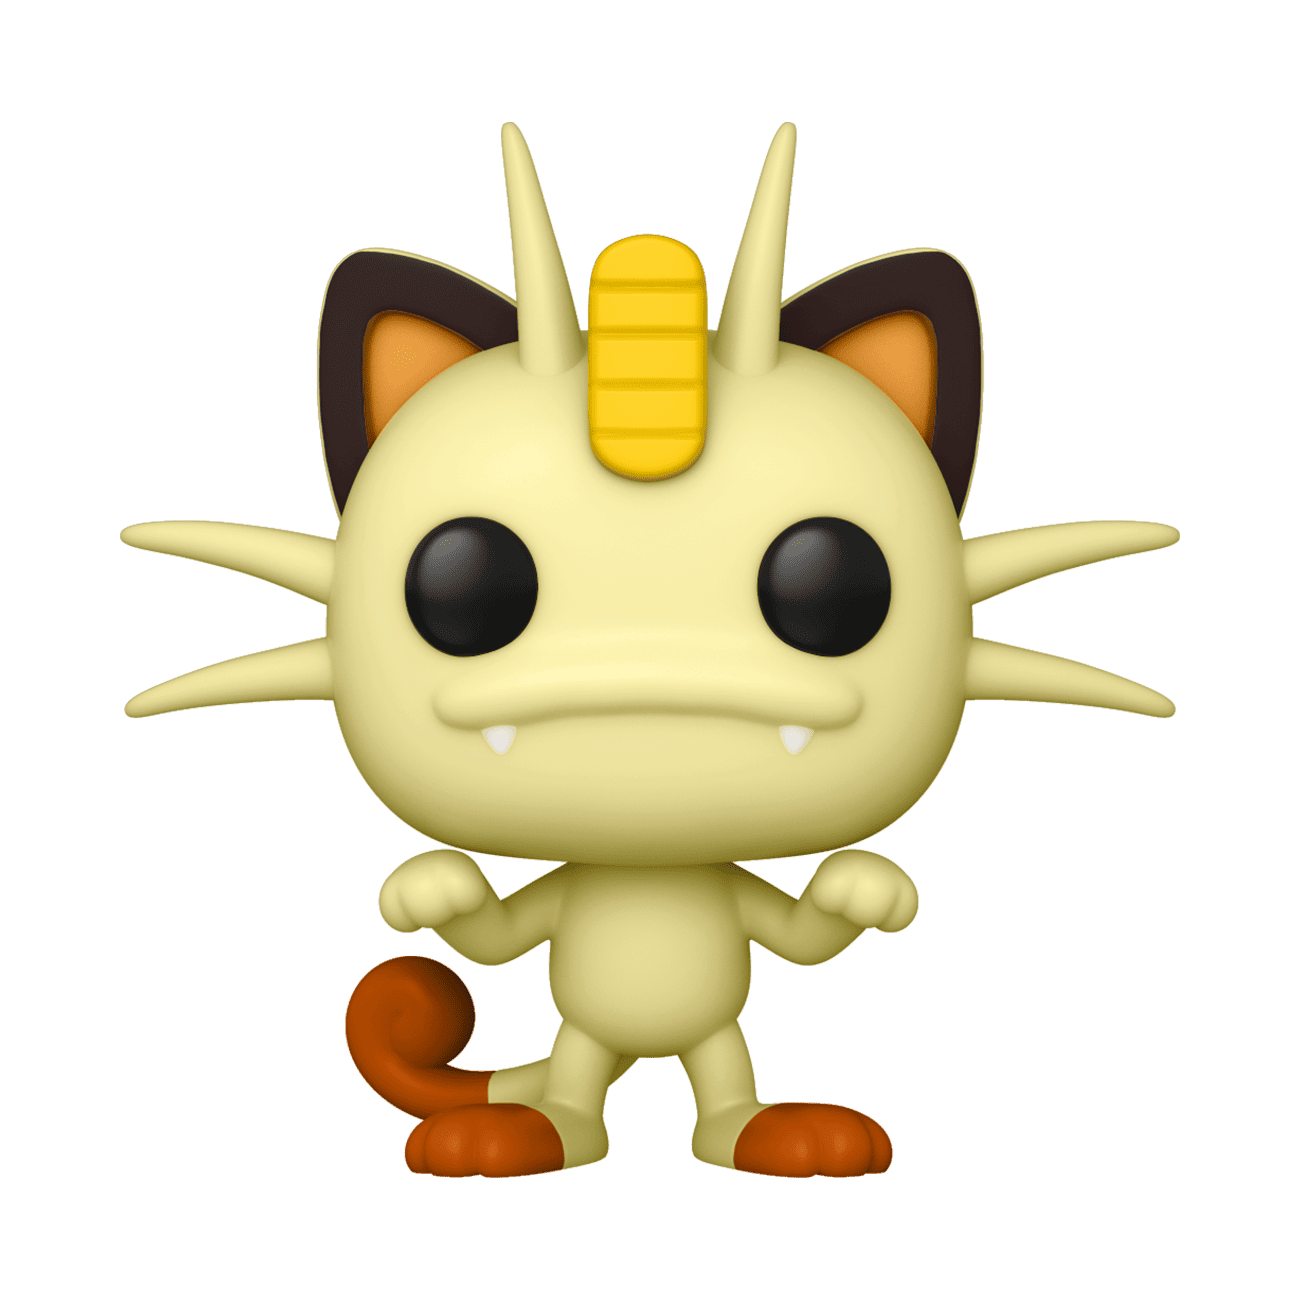 Clawee - ⭐ Funko Pop Meowth needs your help! 💙 Guess